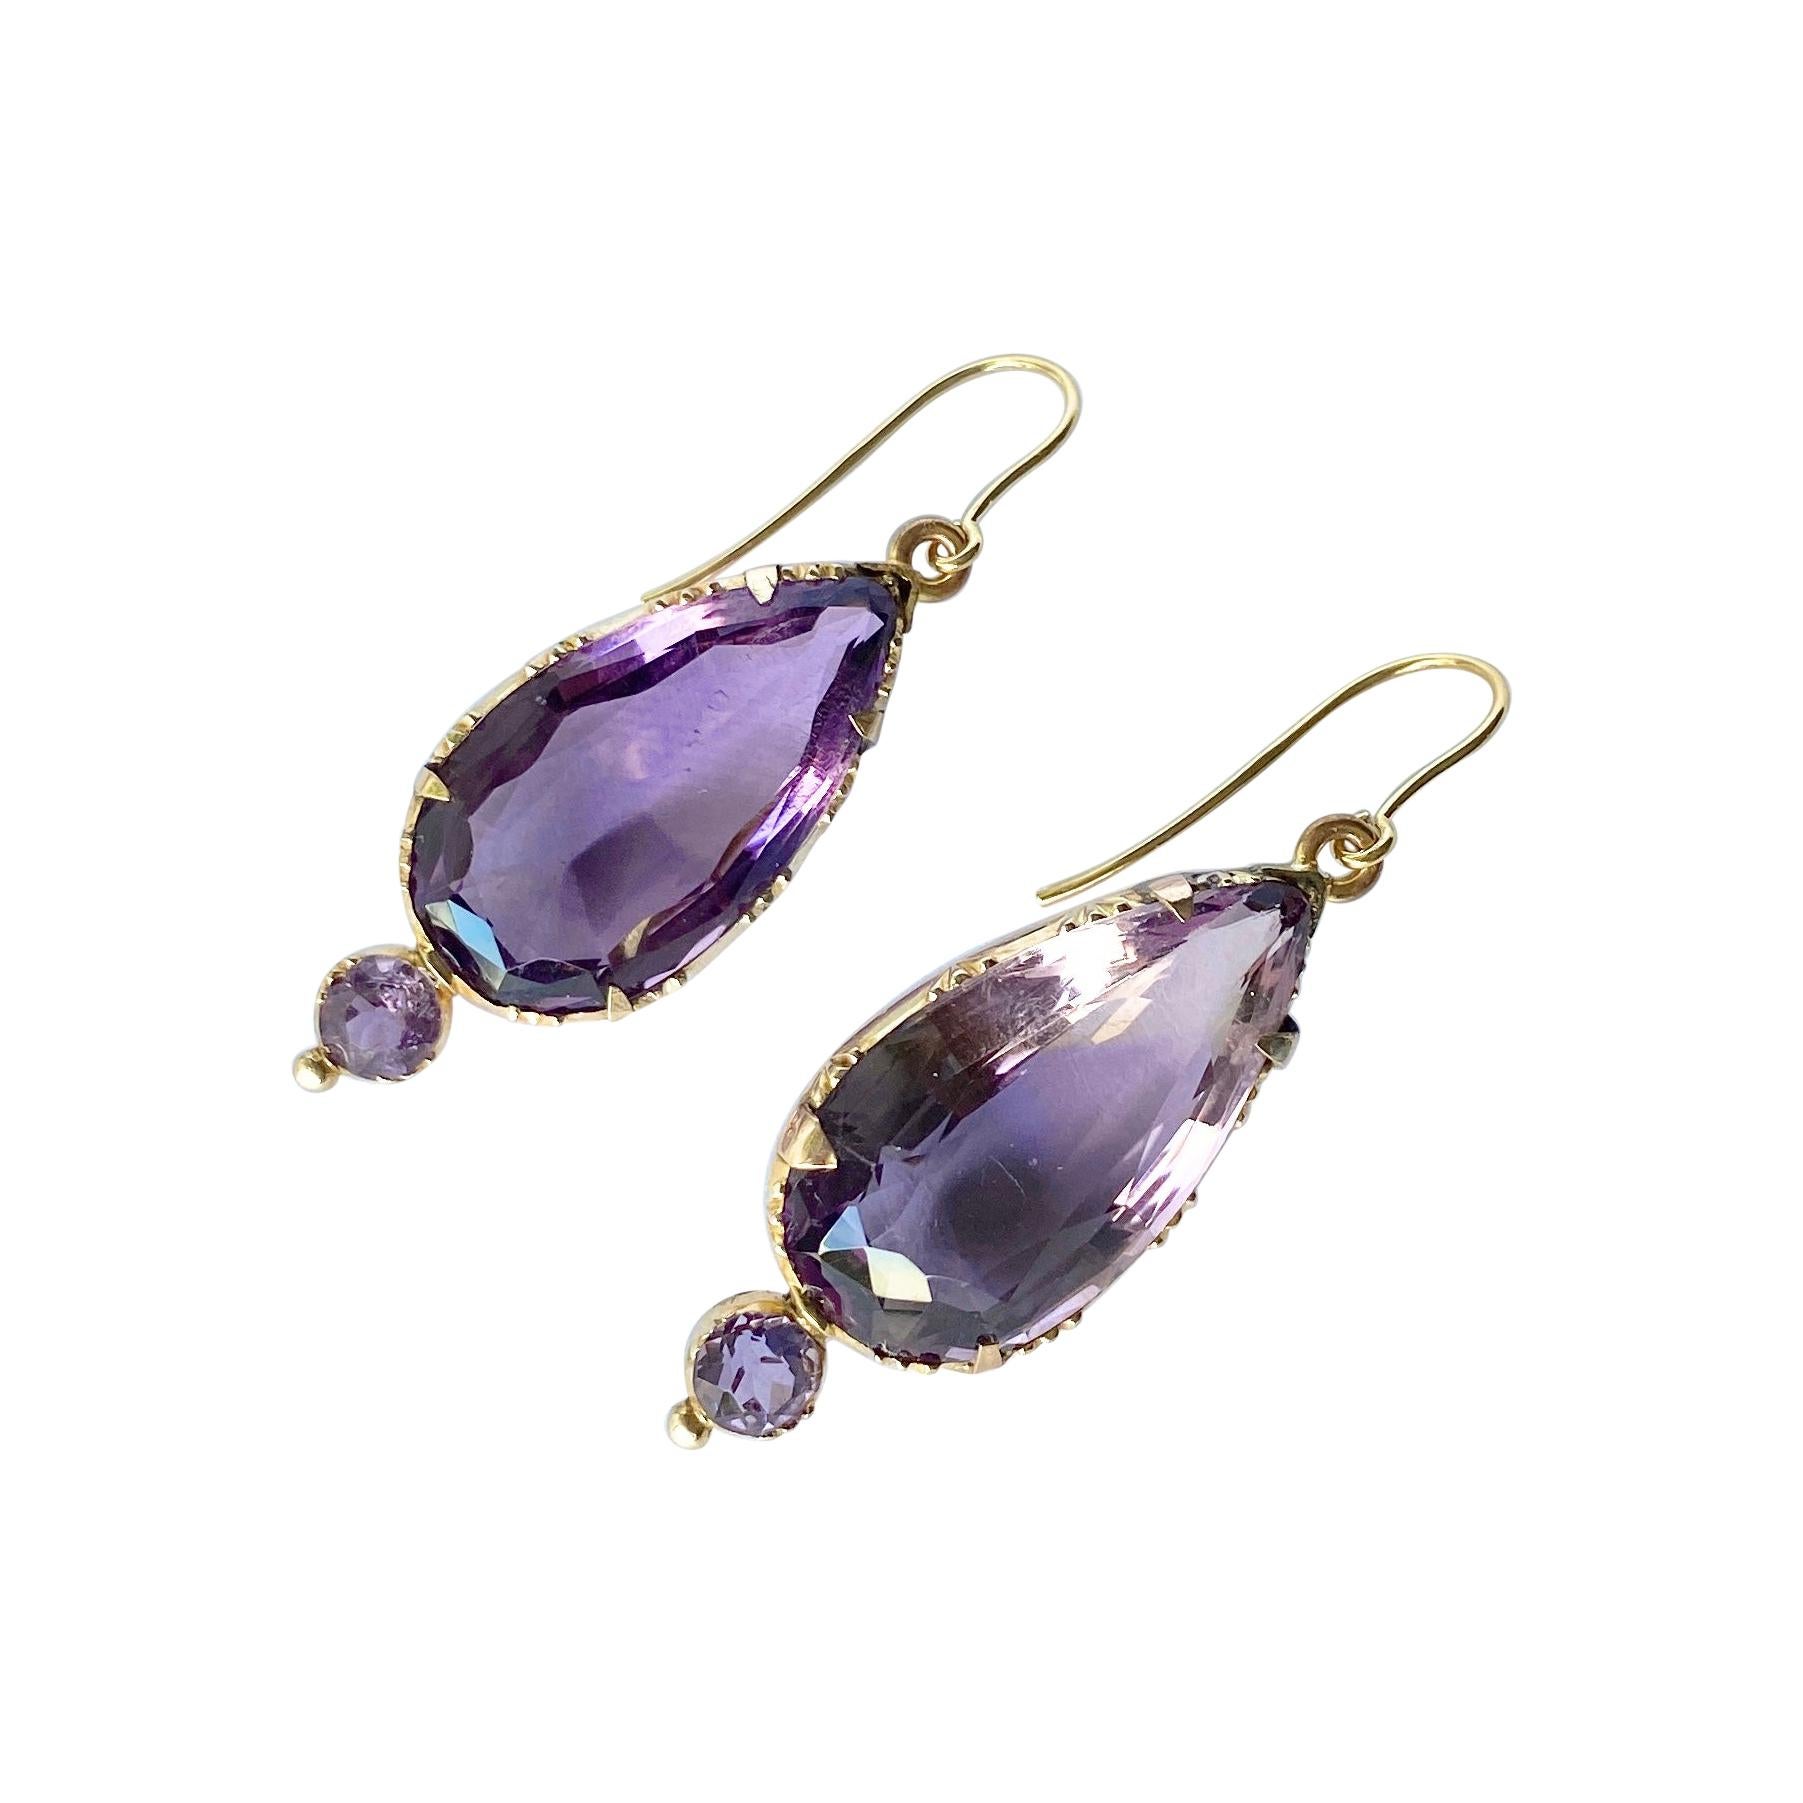 Victorian Amethyst and 9 Carat Gold Earrings